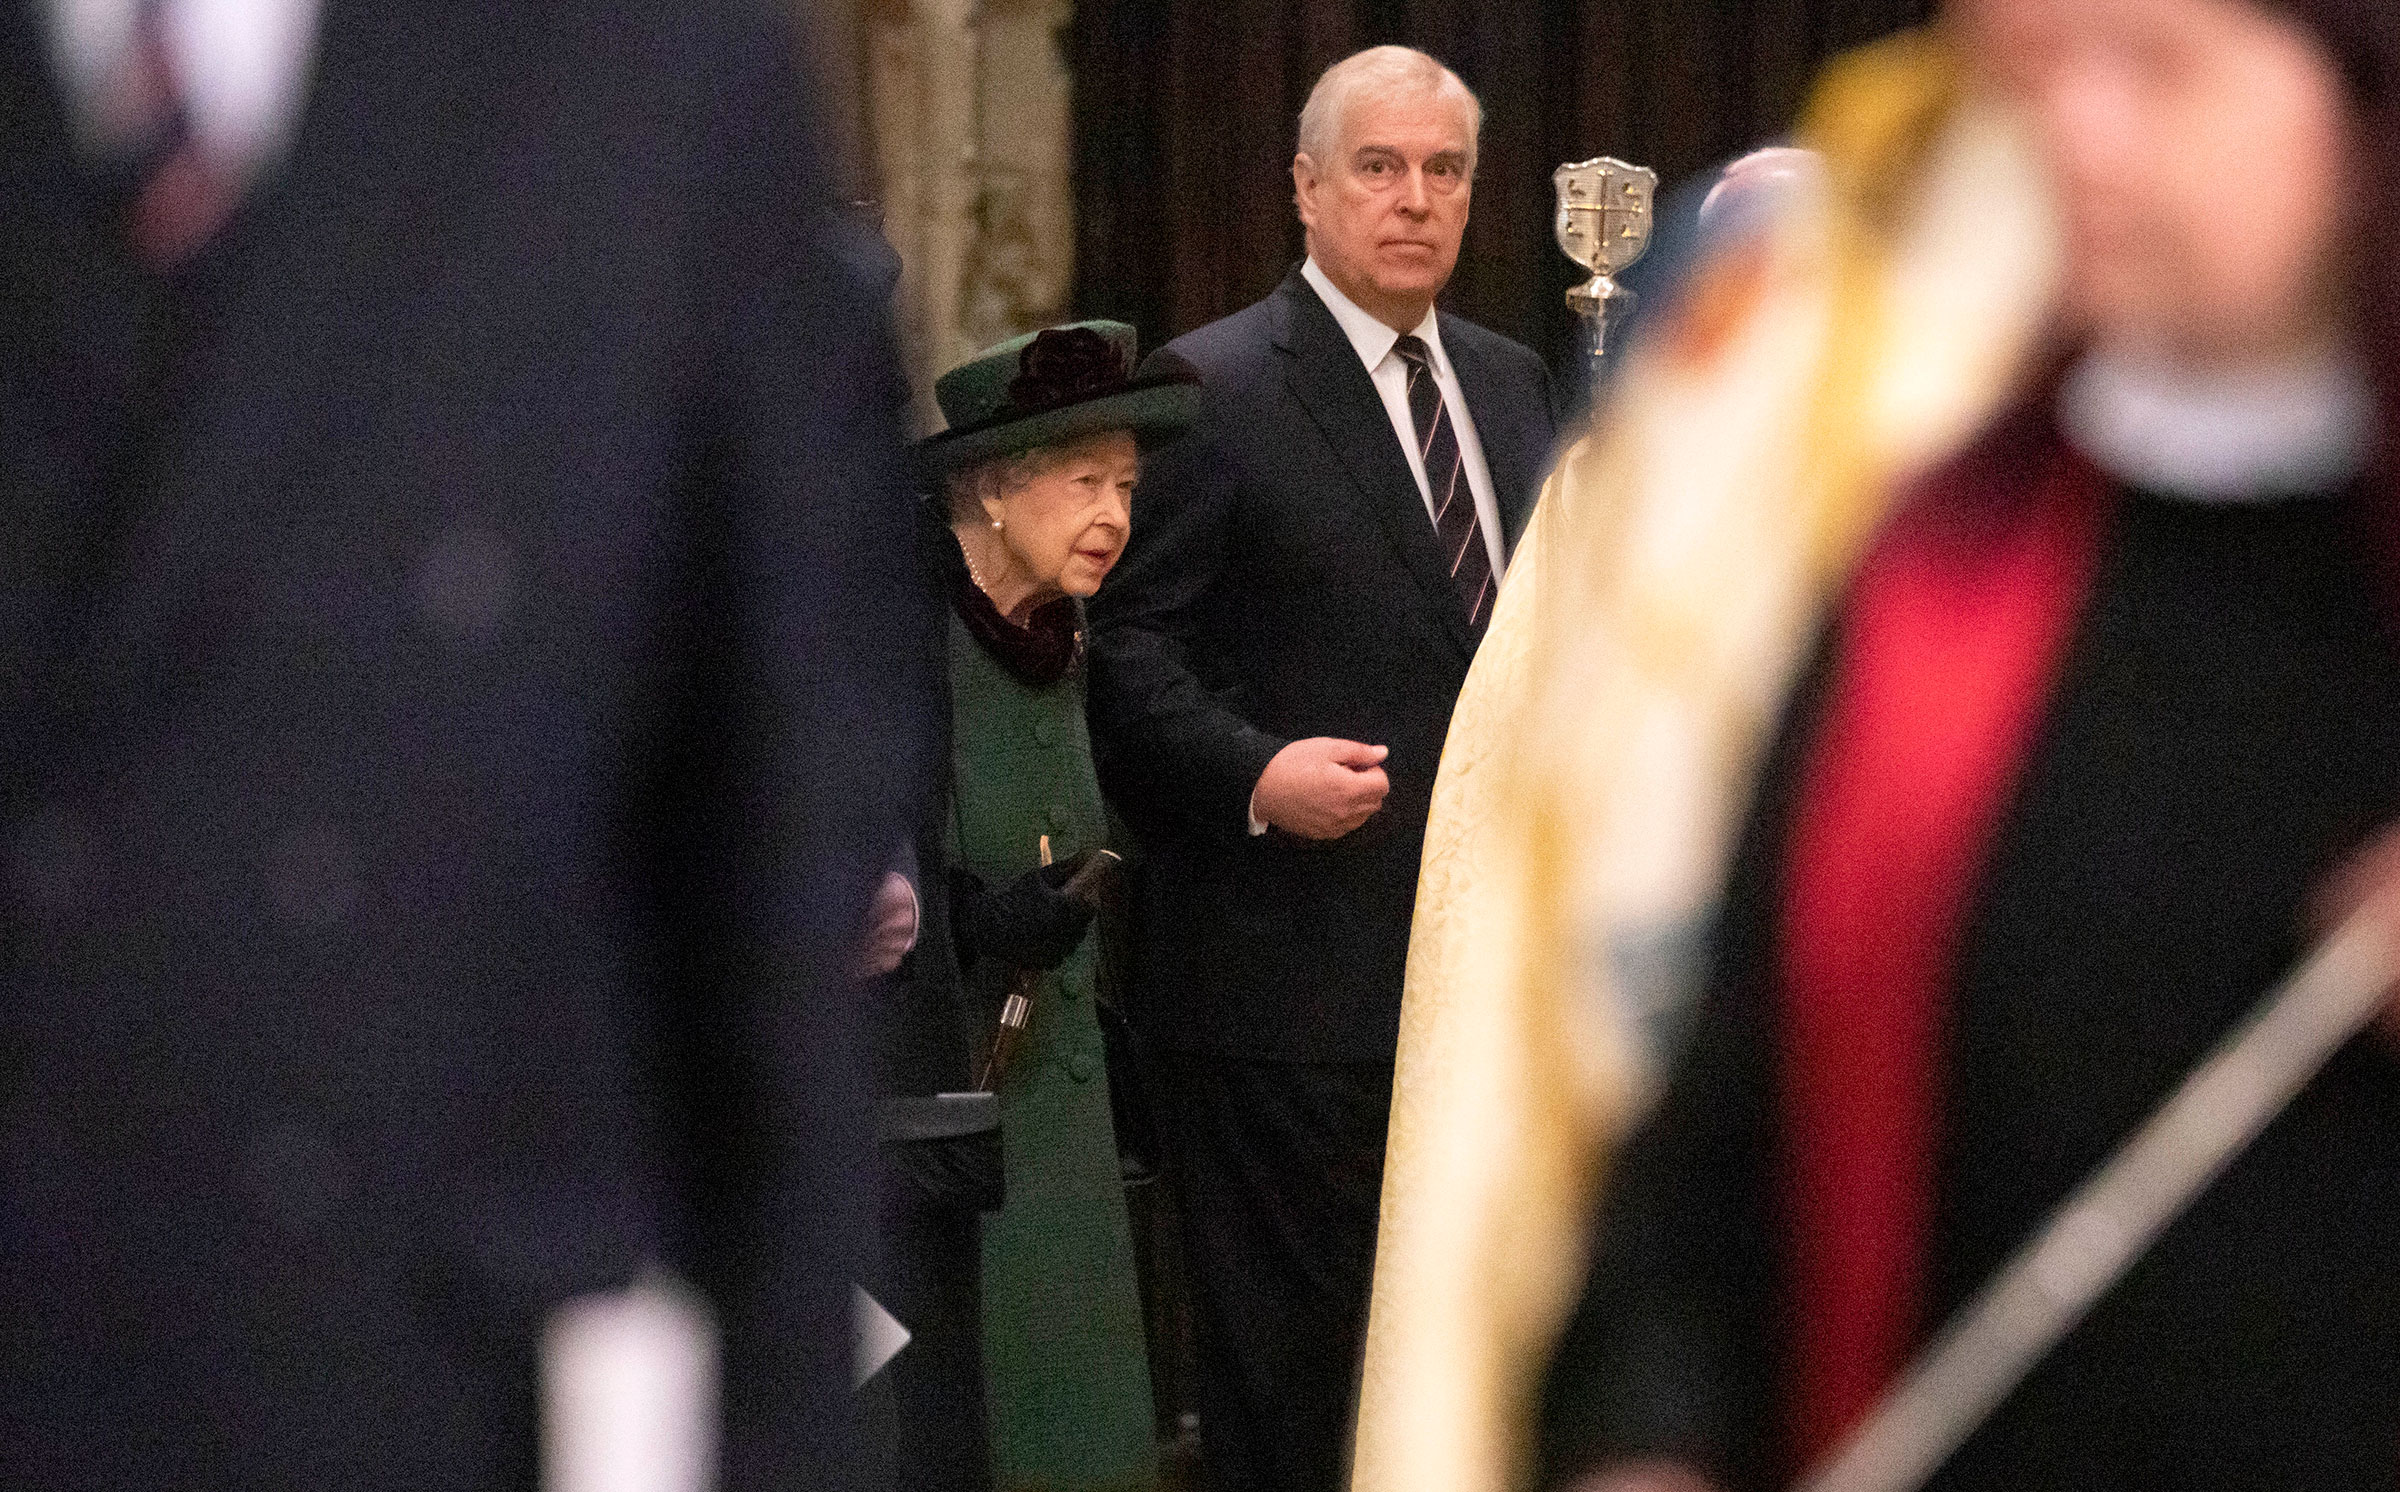 Queen Elizabeth II arrives in Westminster Abbey accompanied by Prince Andrew, Duke of York for the Service Of Thanksgiving For The Duke Of Edinburgh on March 29, 2022 in London. (Richard Pohle—WPA Pool/Getty Images)